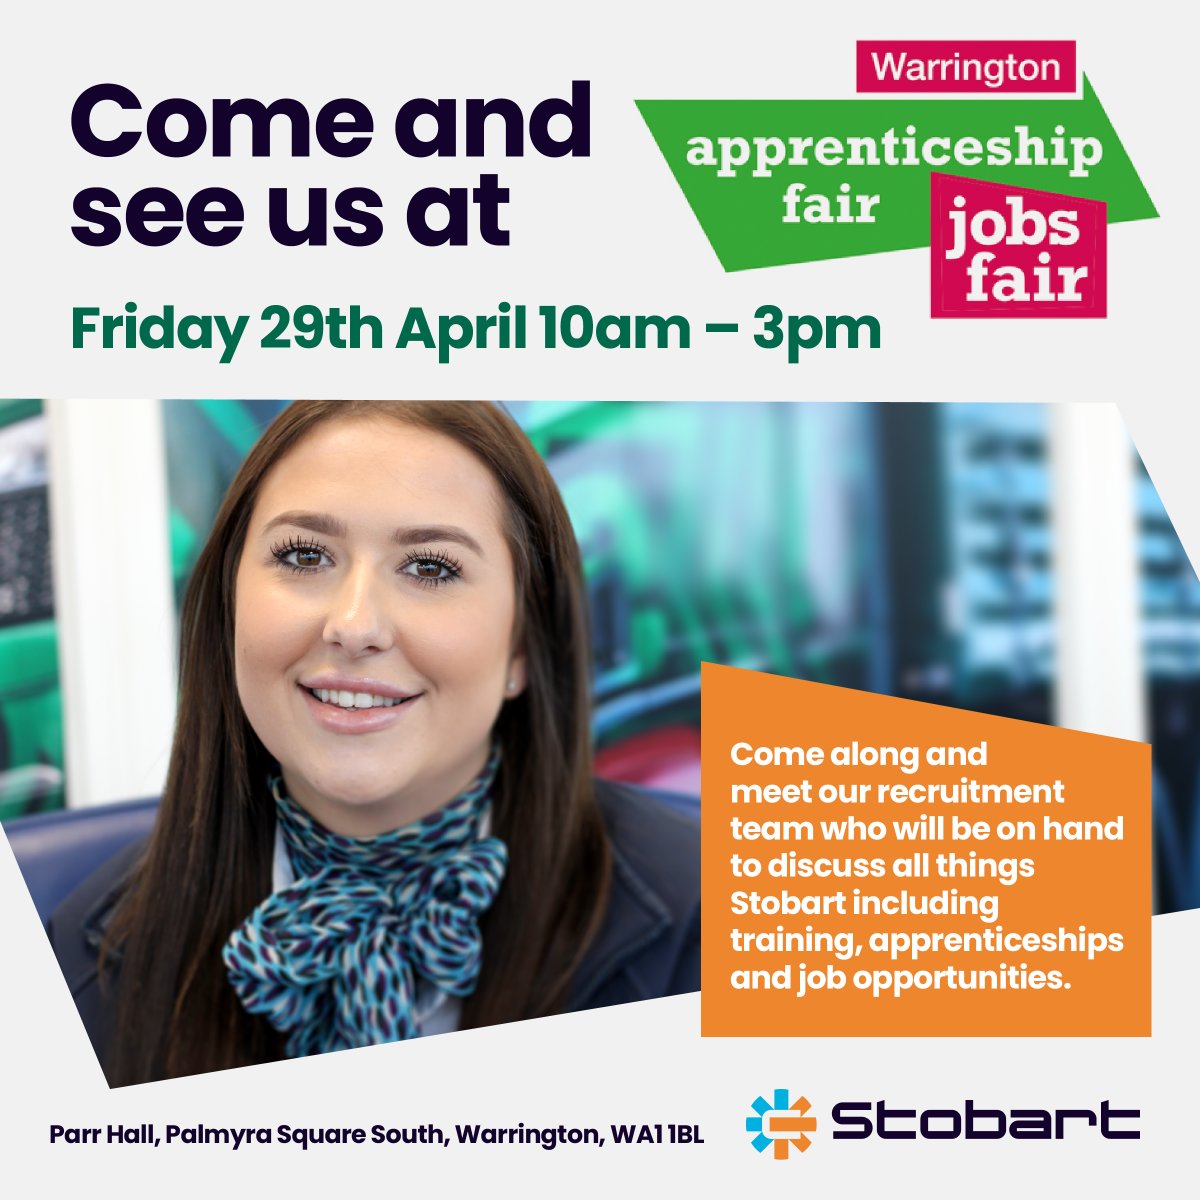 We’re delighted to be attending the Warrington Jobs Fair tomorrow to showcase all our latest career and apprenticeship opportunities available. Interested? Come along and find out more - we look forward to seeing you there! #JobFair #Apprenticeship #Apprentice #Career #Job